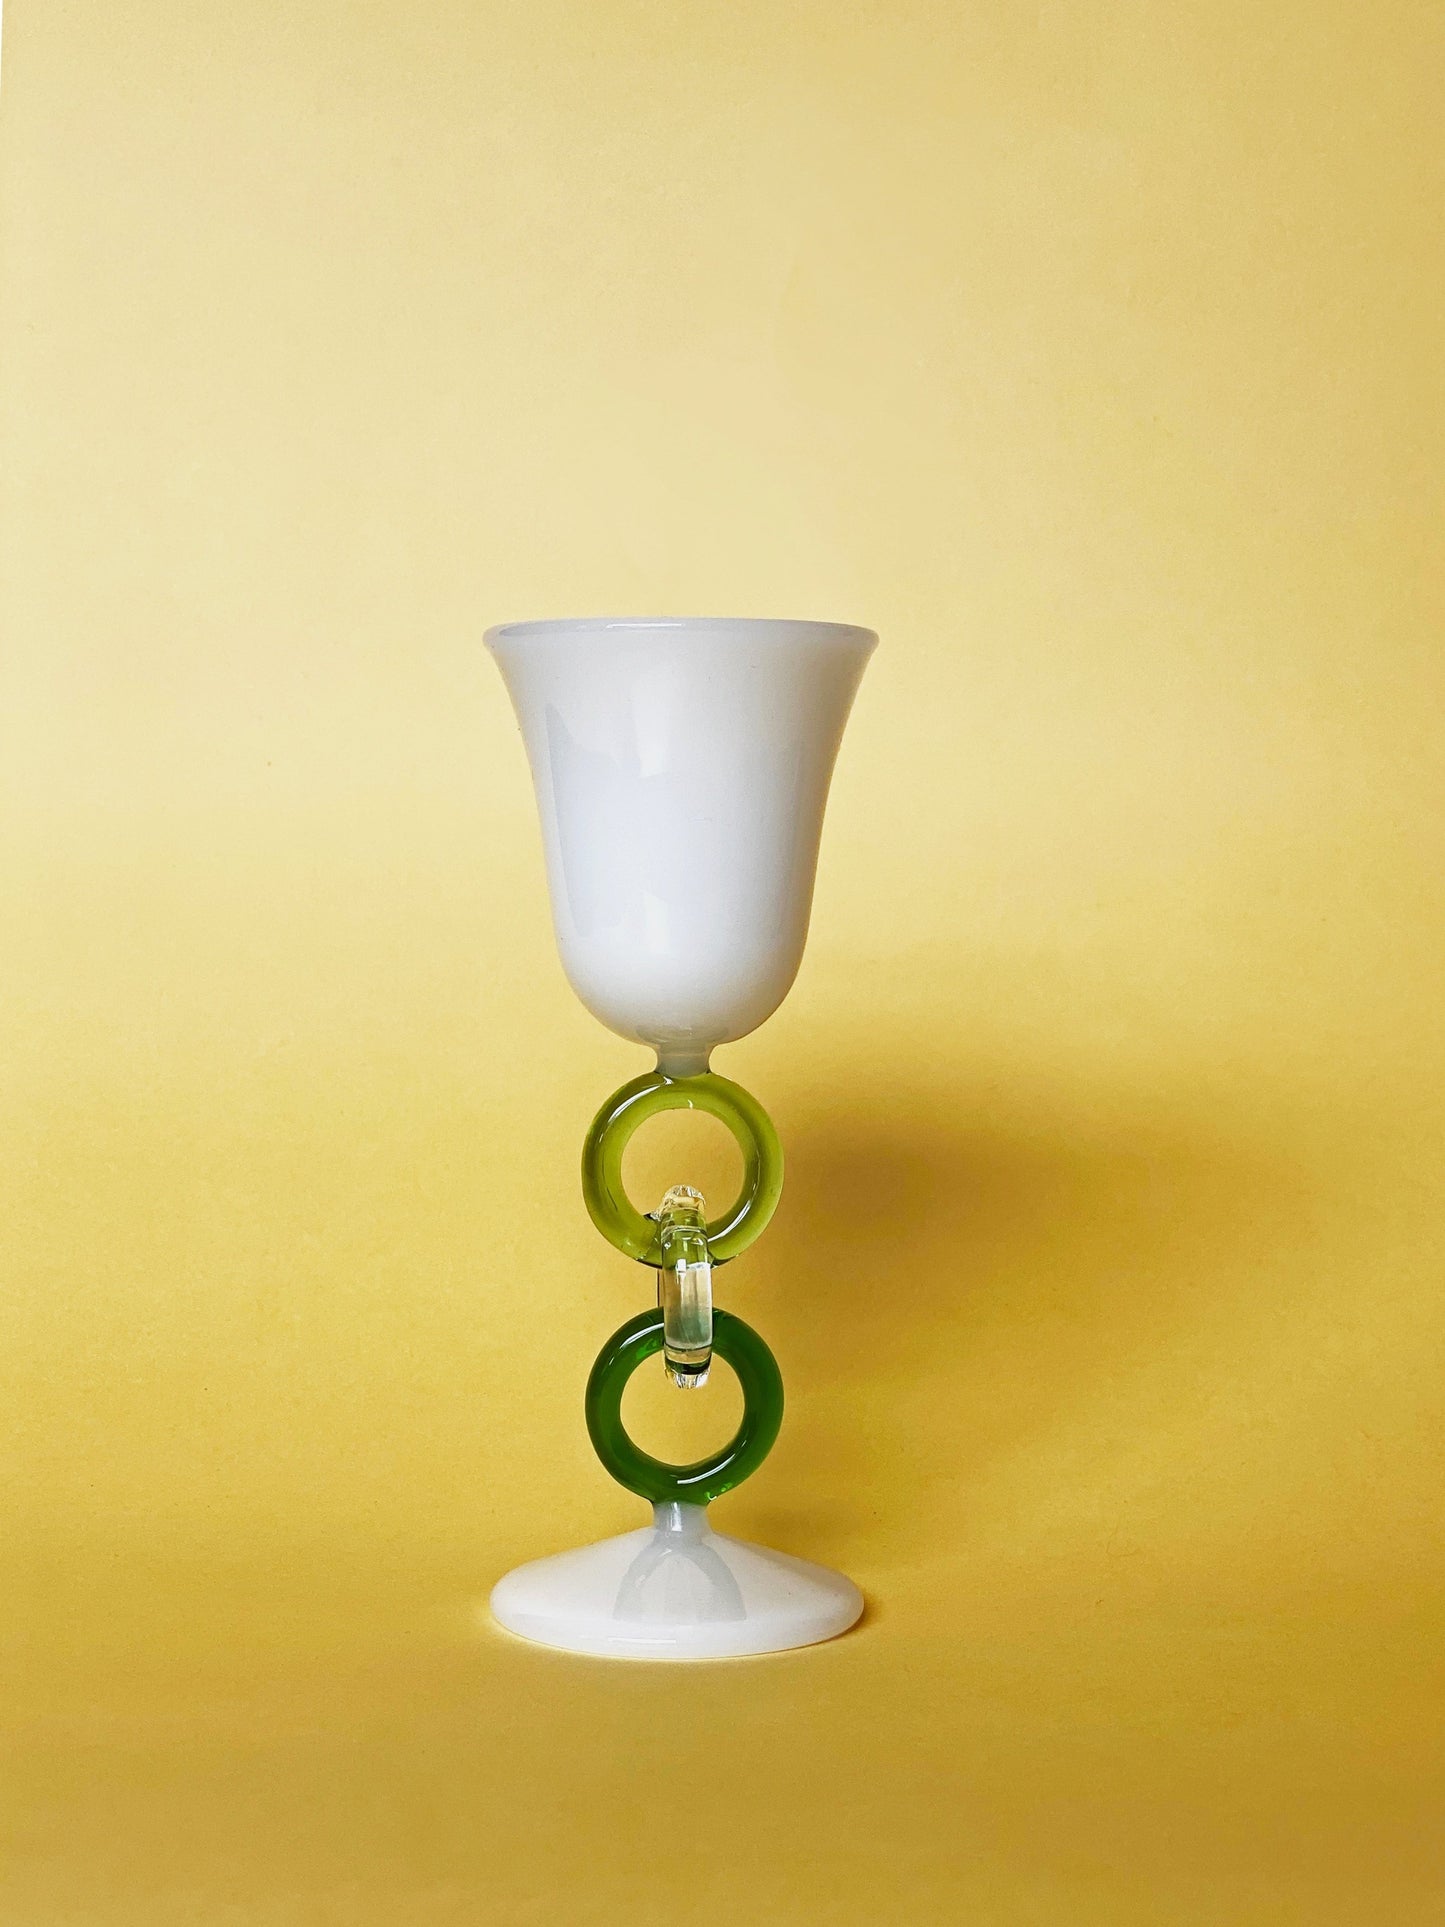 limited-edition-link-collection-elegant-handcrafted-green-link-wine-glass